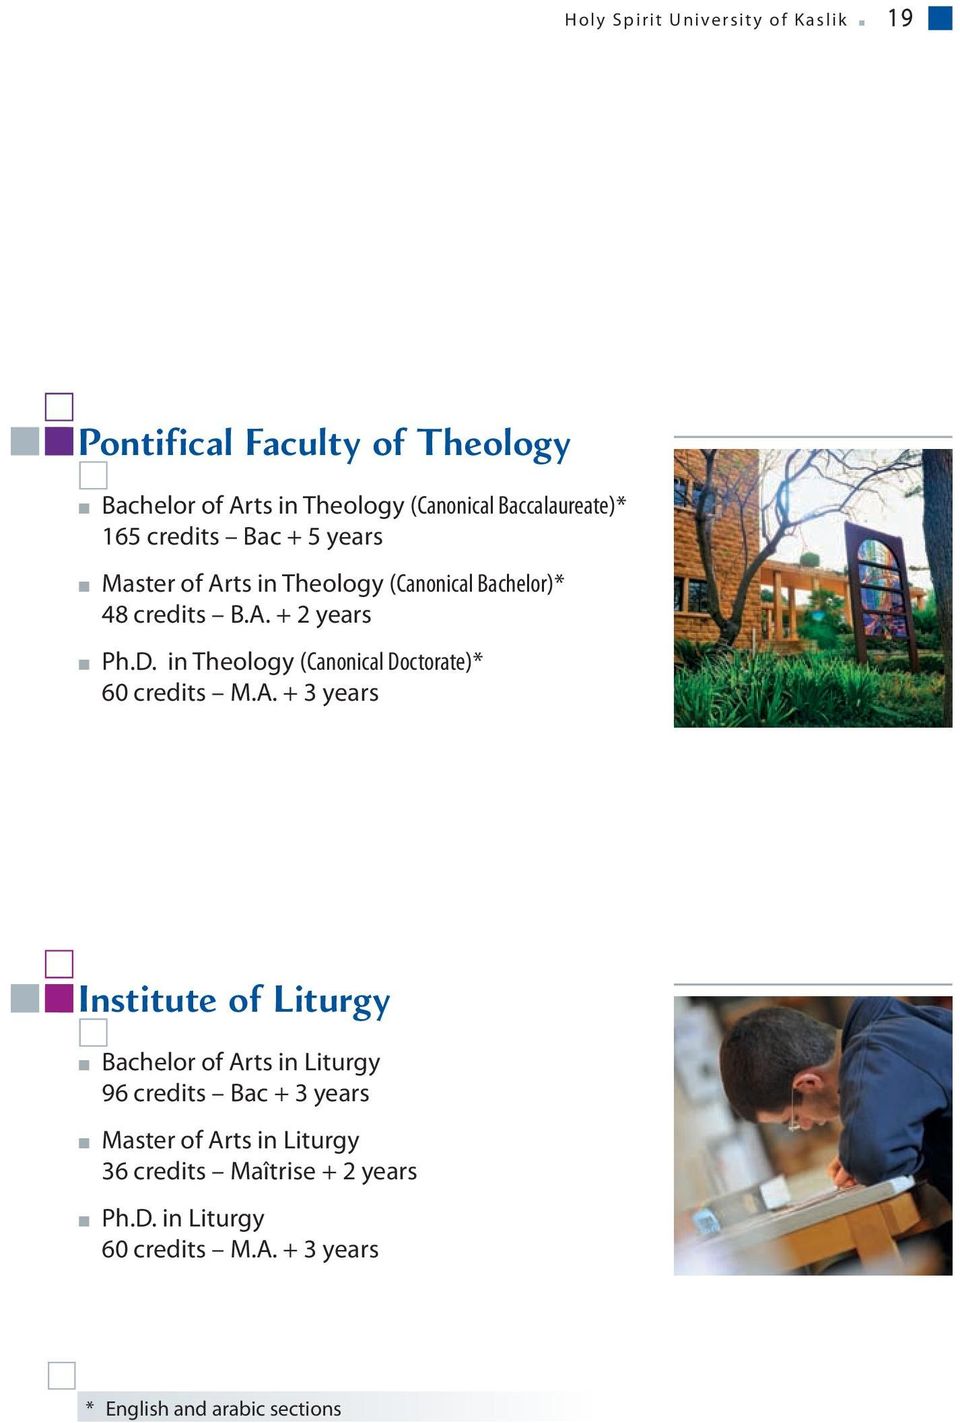 in Theology (Canonical Doctorate)* 60 credits M.A.